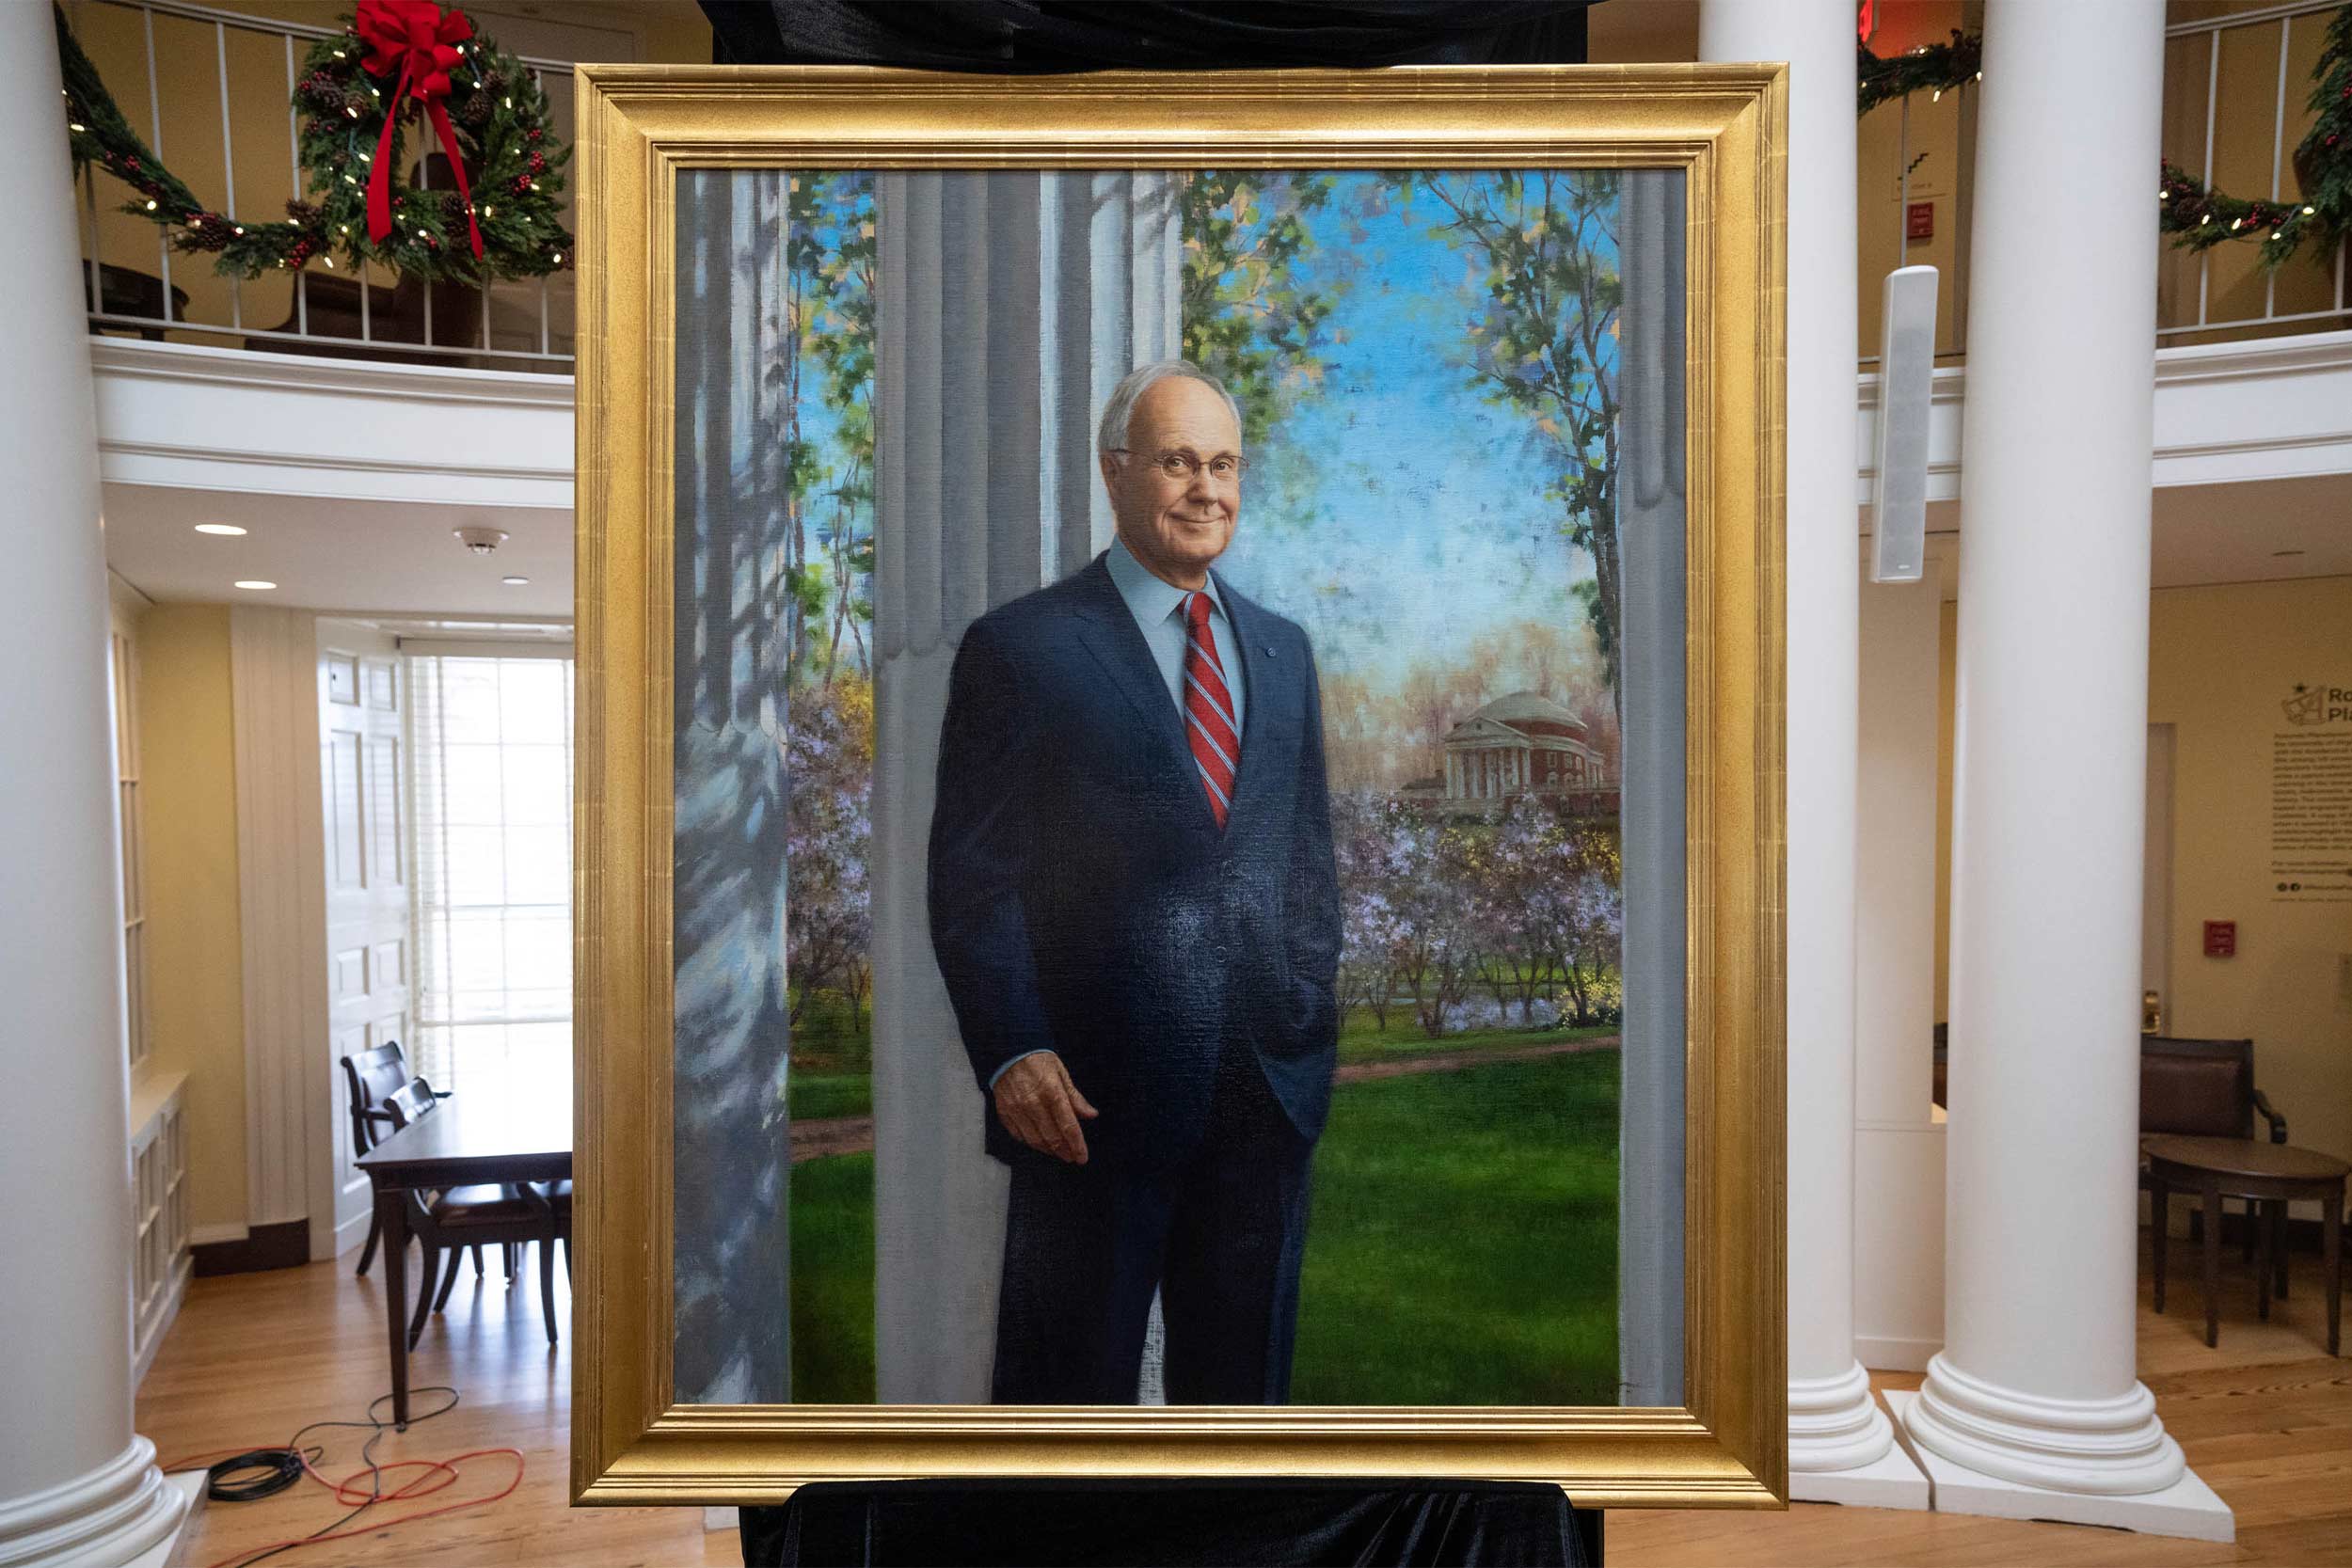 The portrait of John T. Casteen III, unveiled Friday during a Board of Visitors’ lunch, will hang in the Rotunda’s North Oval Room. (Photo by Sanjay Suchak, University Communications)